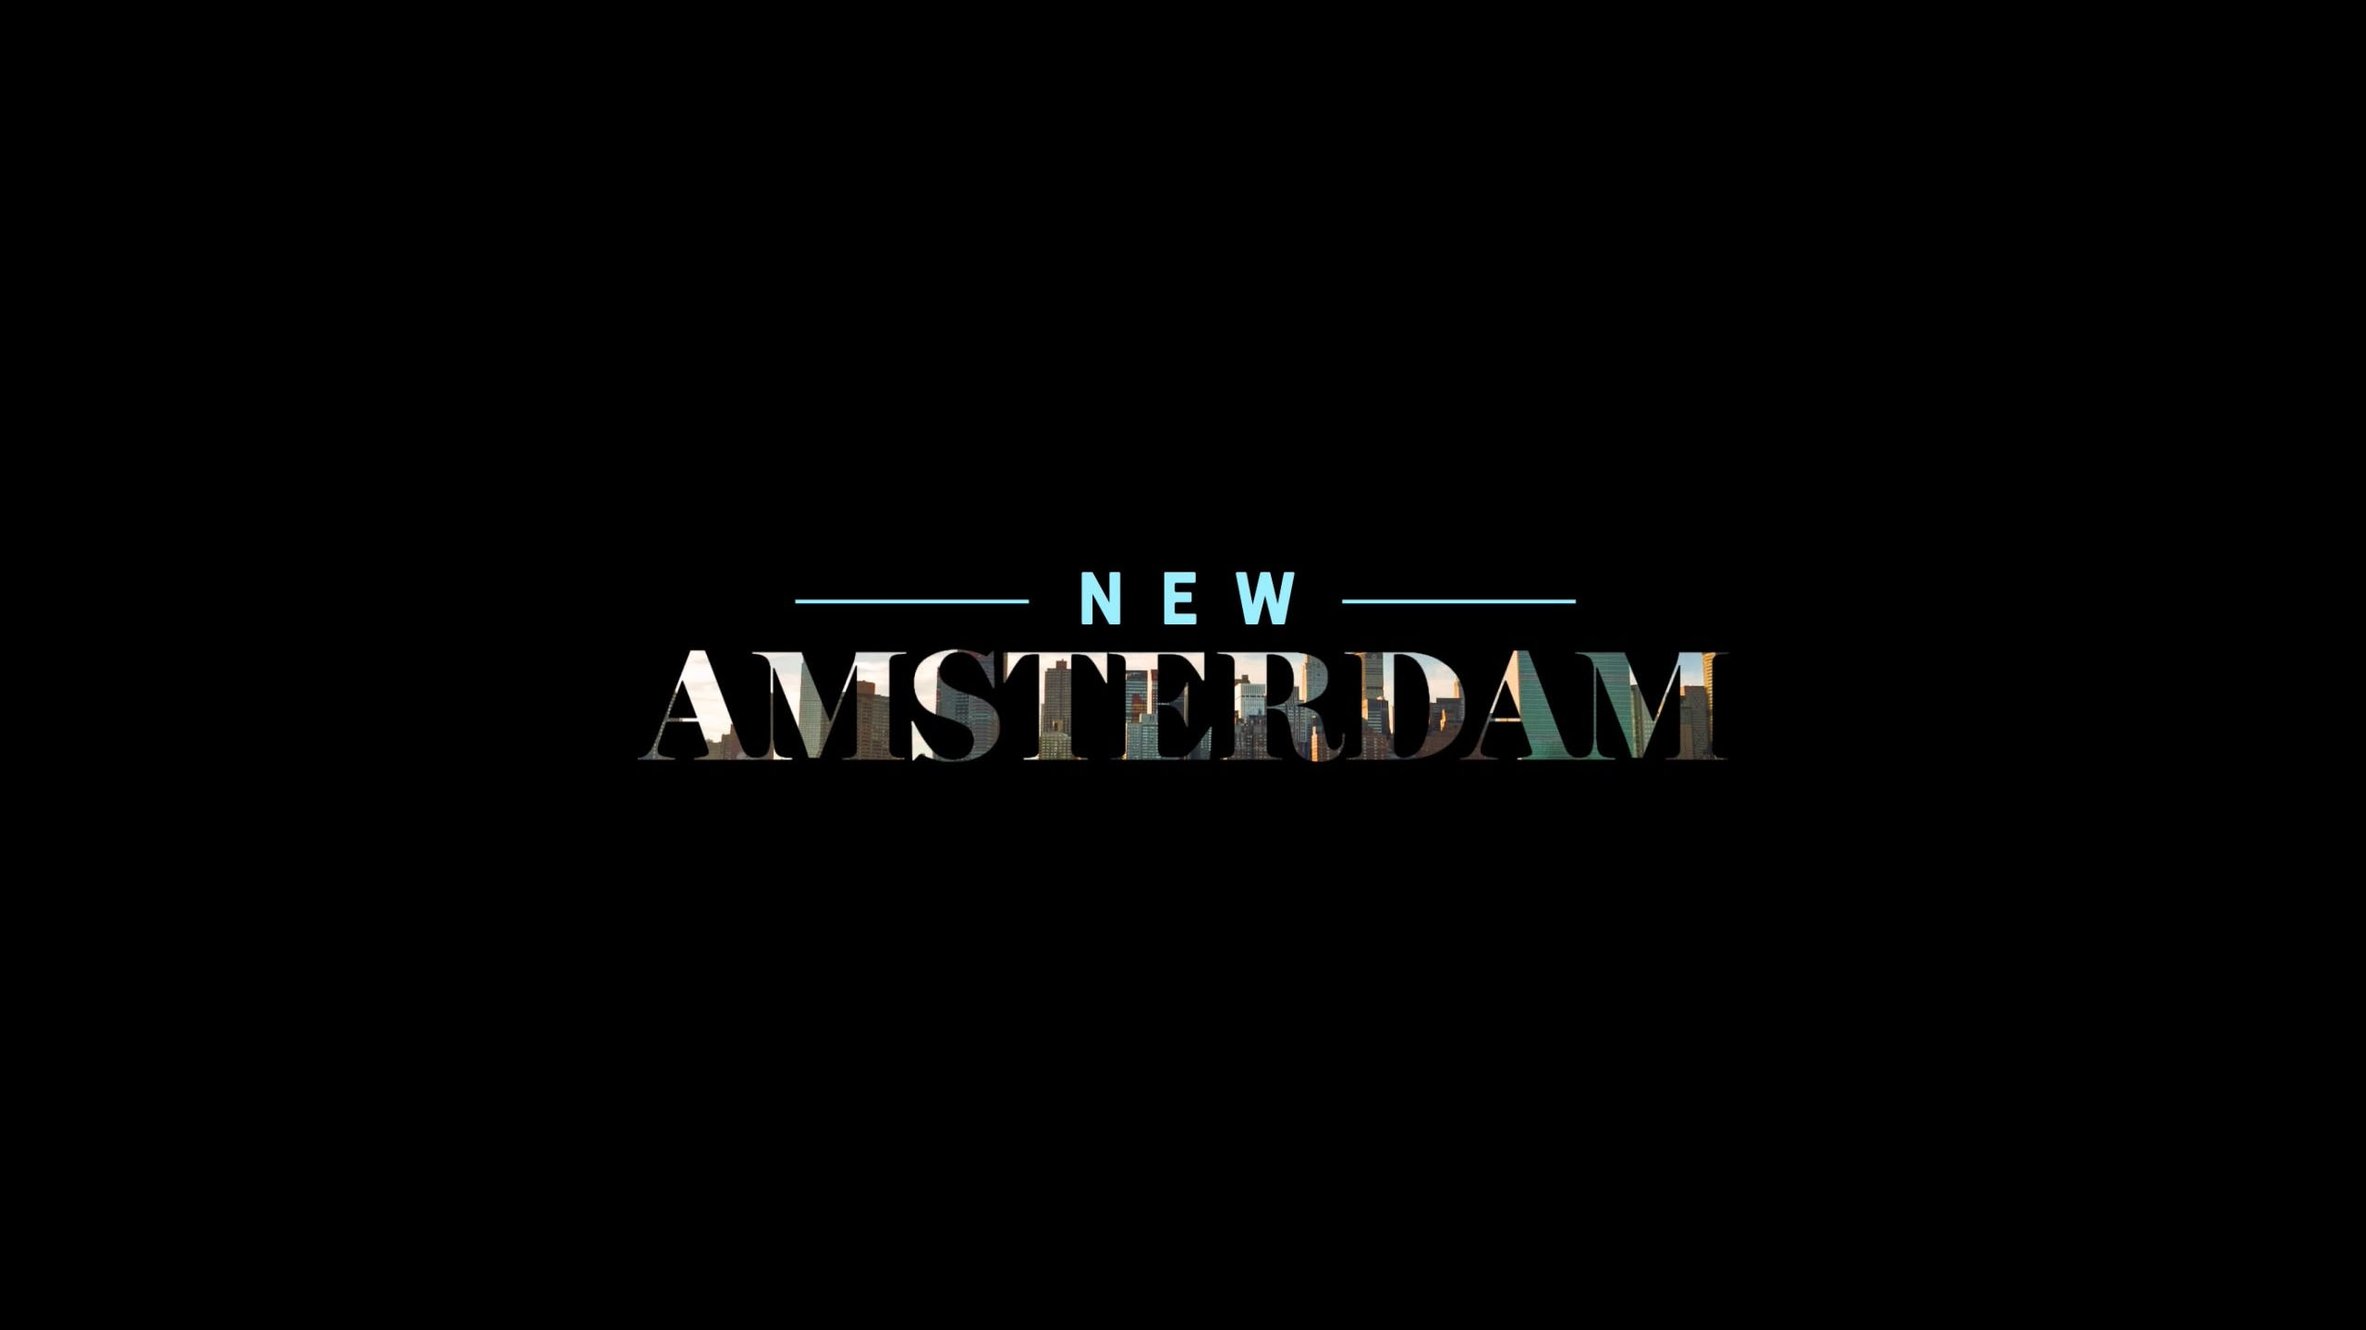 NBC’s New Amsterdam Is Casting Speaking Role!